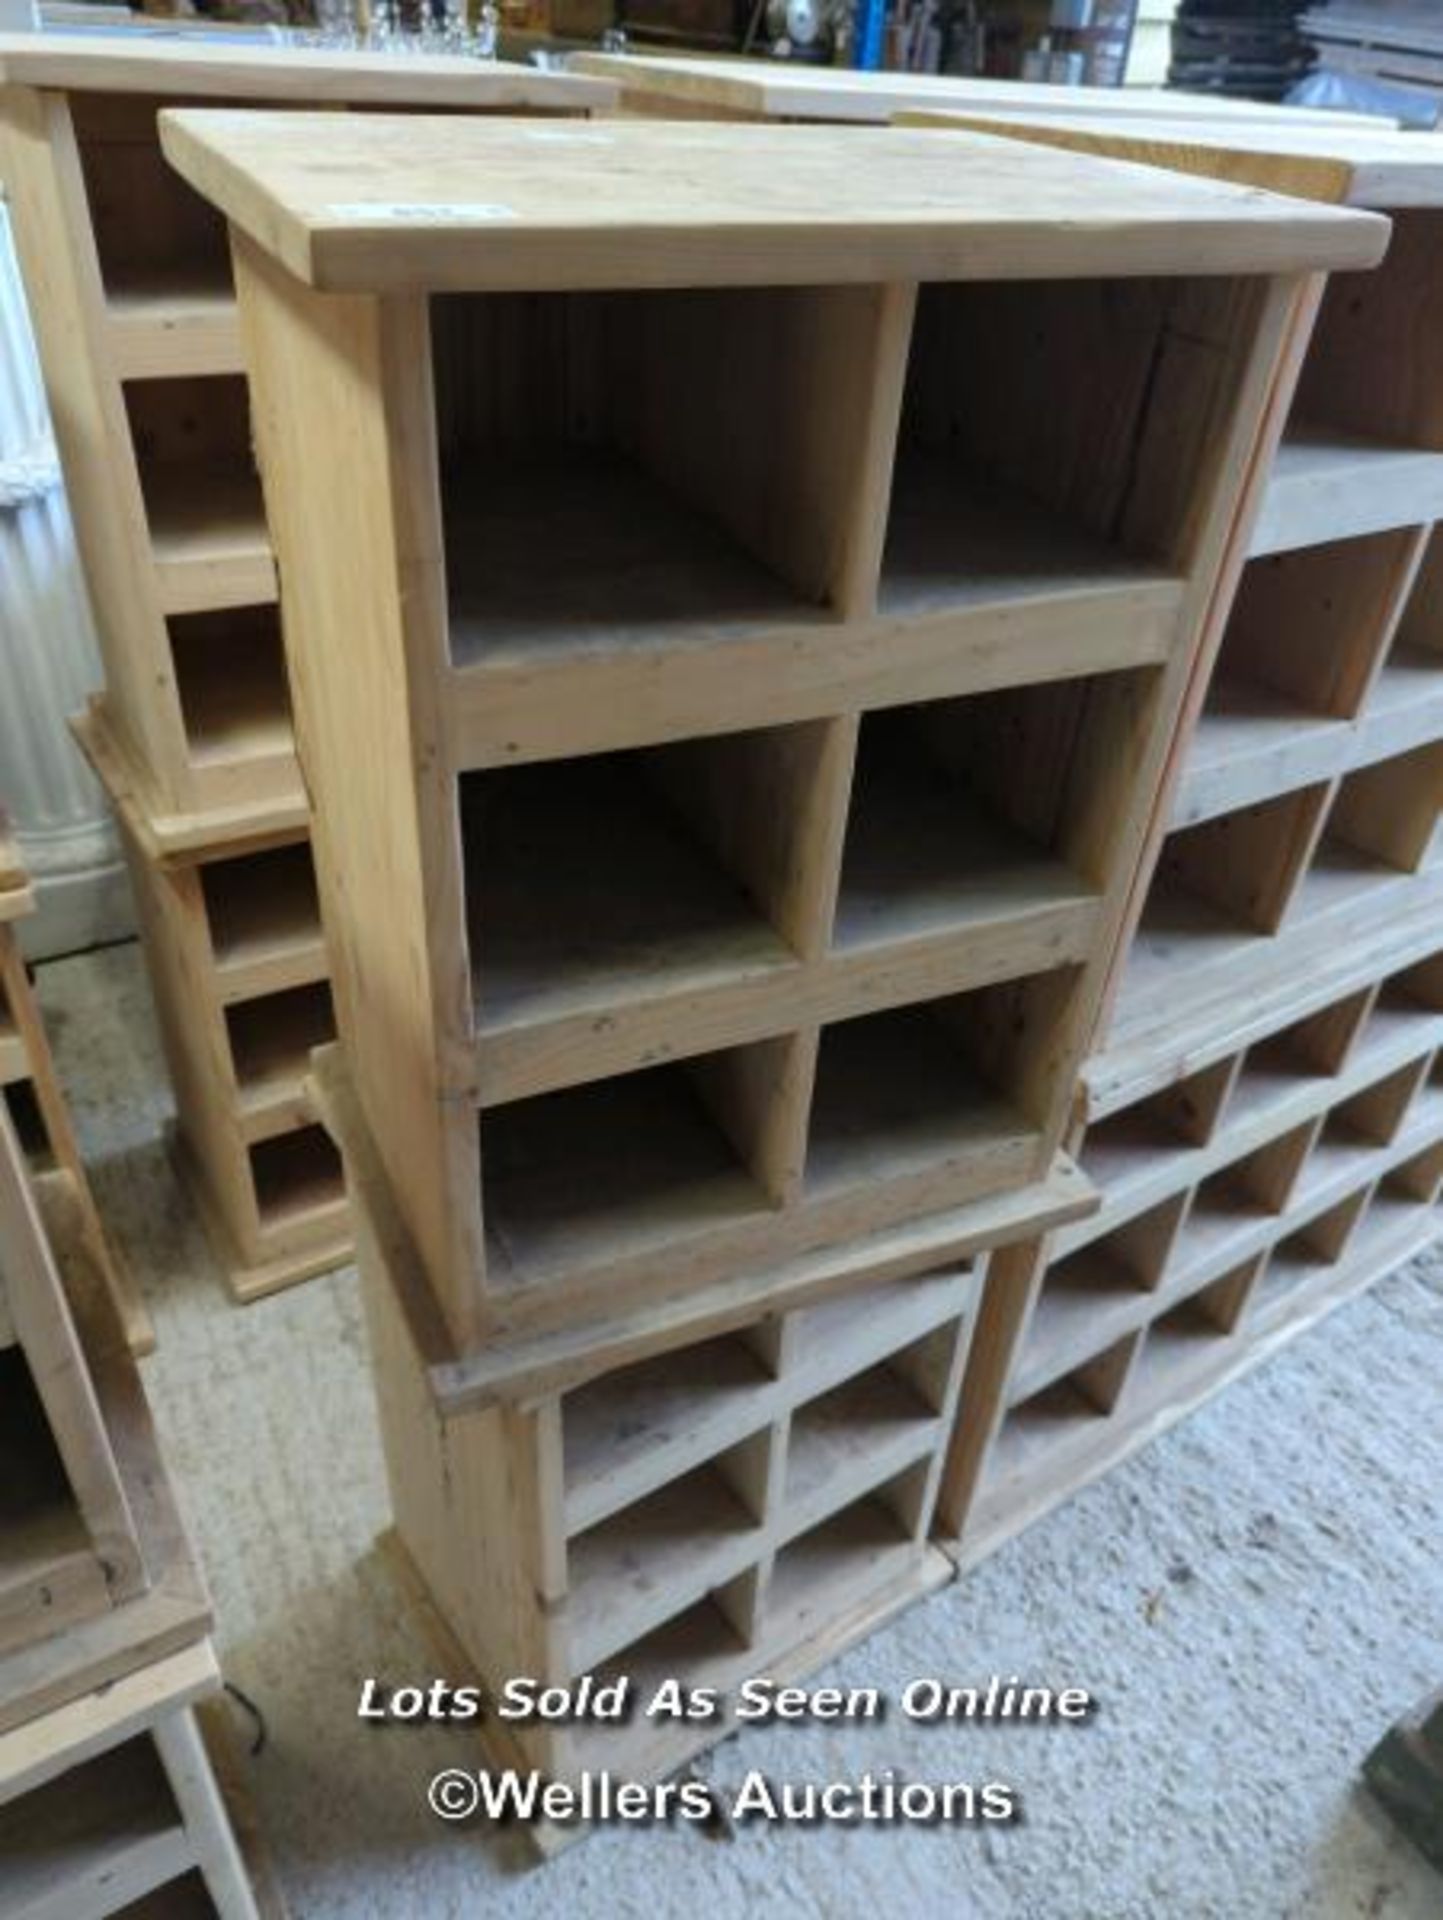 *PAIR OF PINE STORAGE SHELVES WITH SIX COMPARTMENTS, 26 HIGH X 19.5 WIDE X 15 DEEP / ALL LOTS ARE